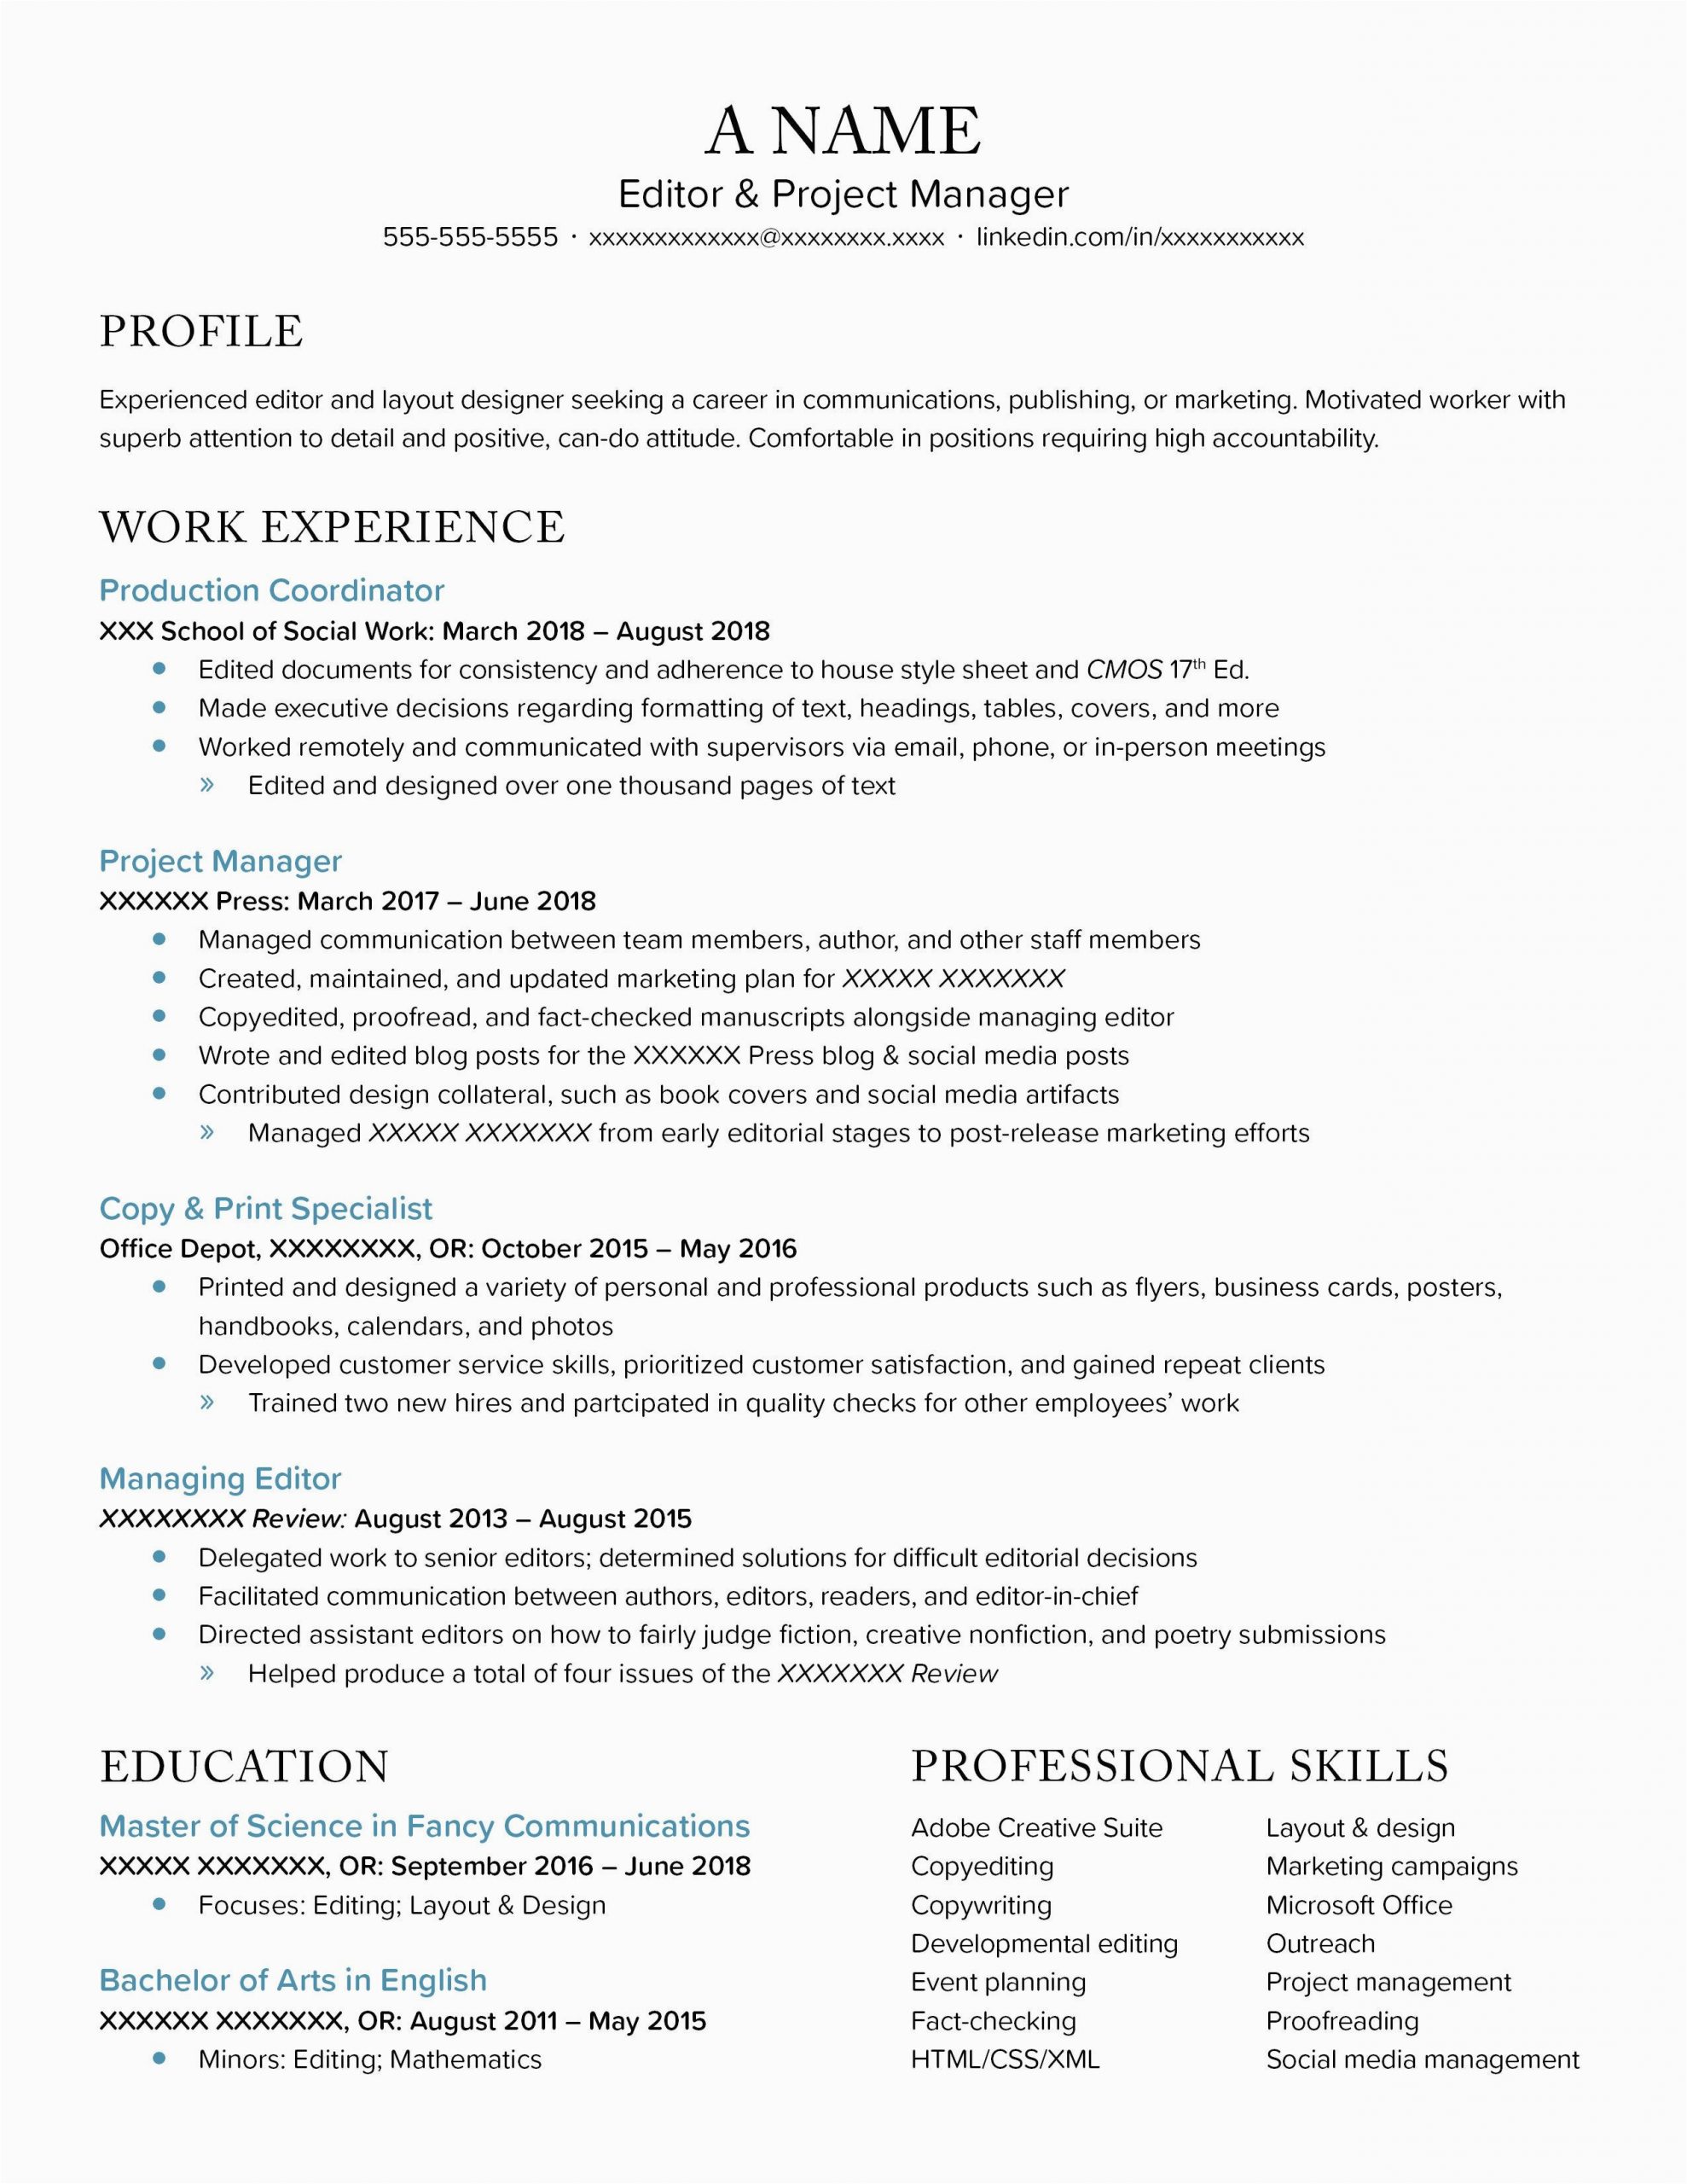 Incomplete Masters Degree On Resume Sample Recently Graduated with My Master S Degree Resume isn T